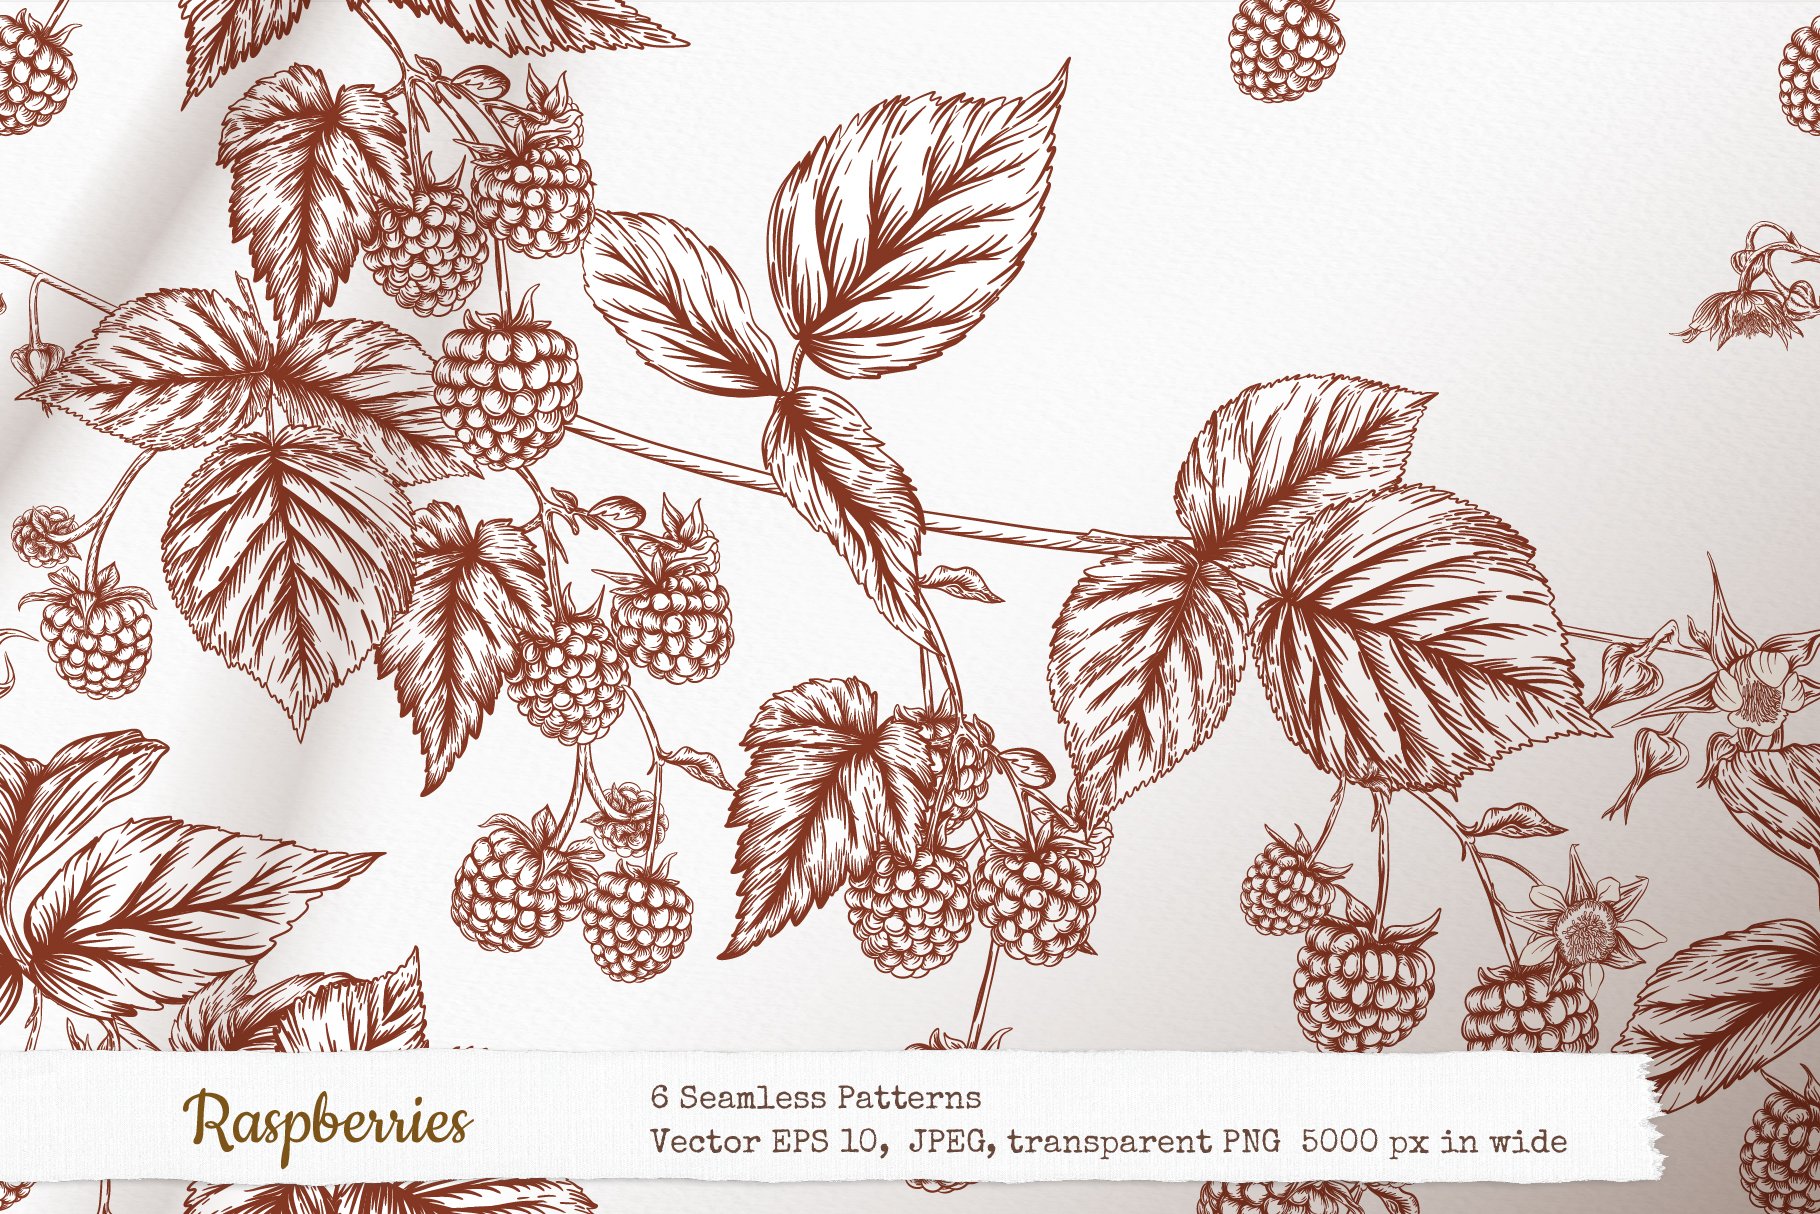 Raspberries - 6 Seamless Patterns cover image.